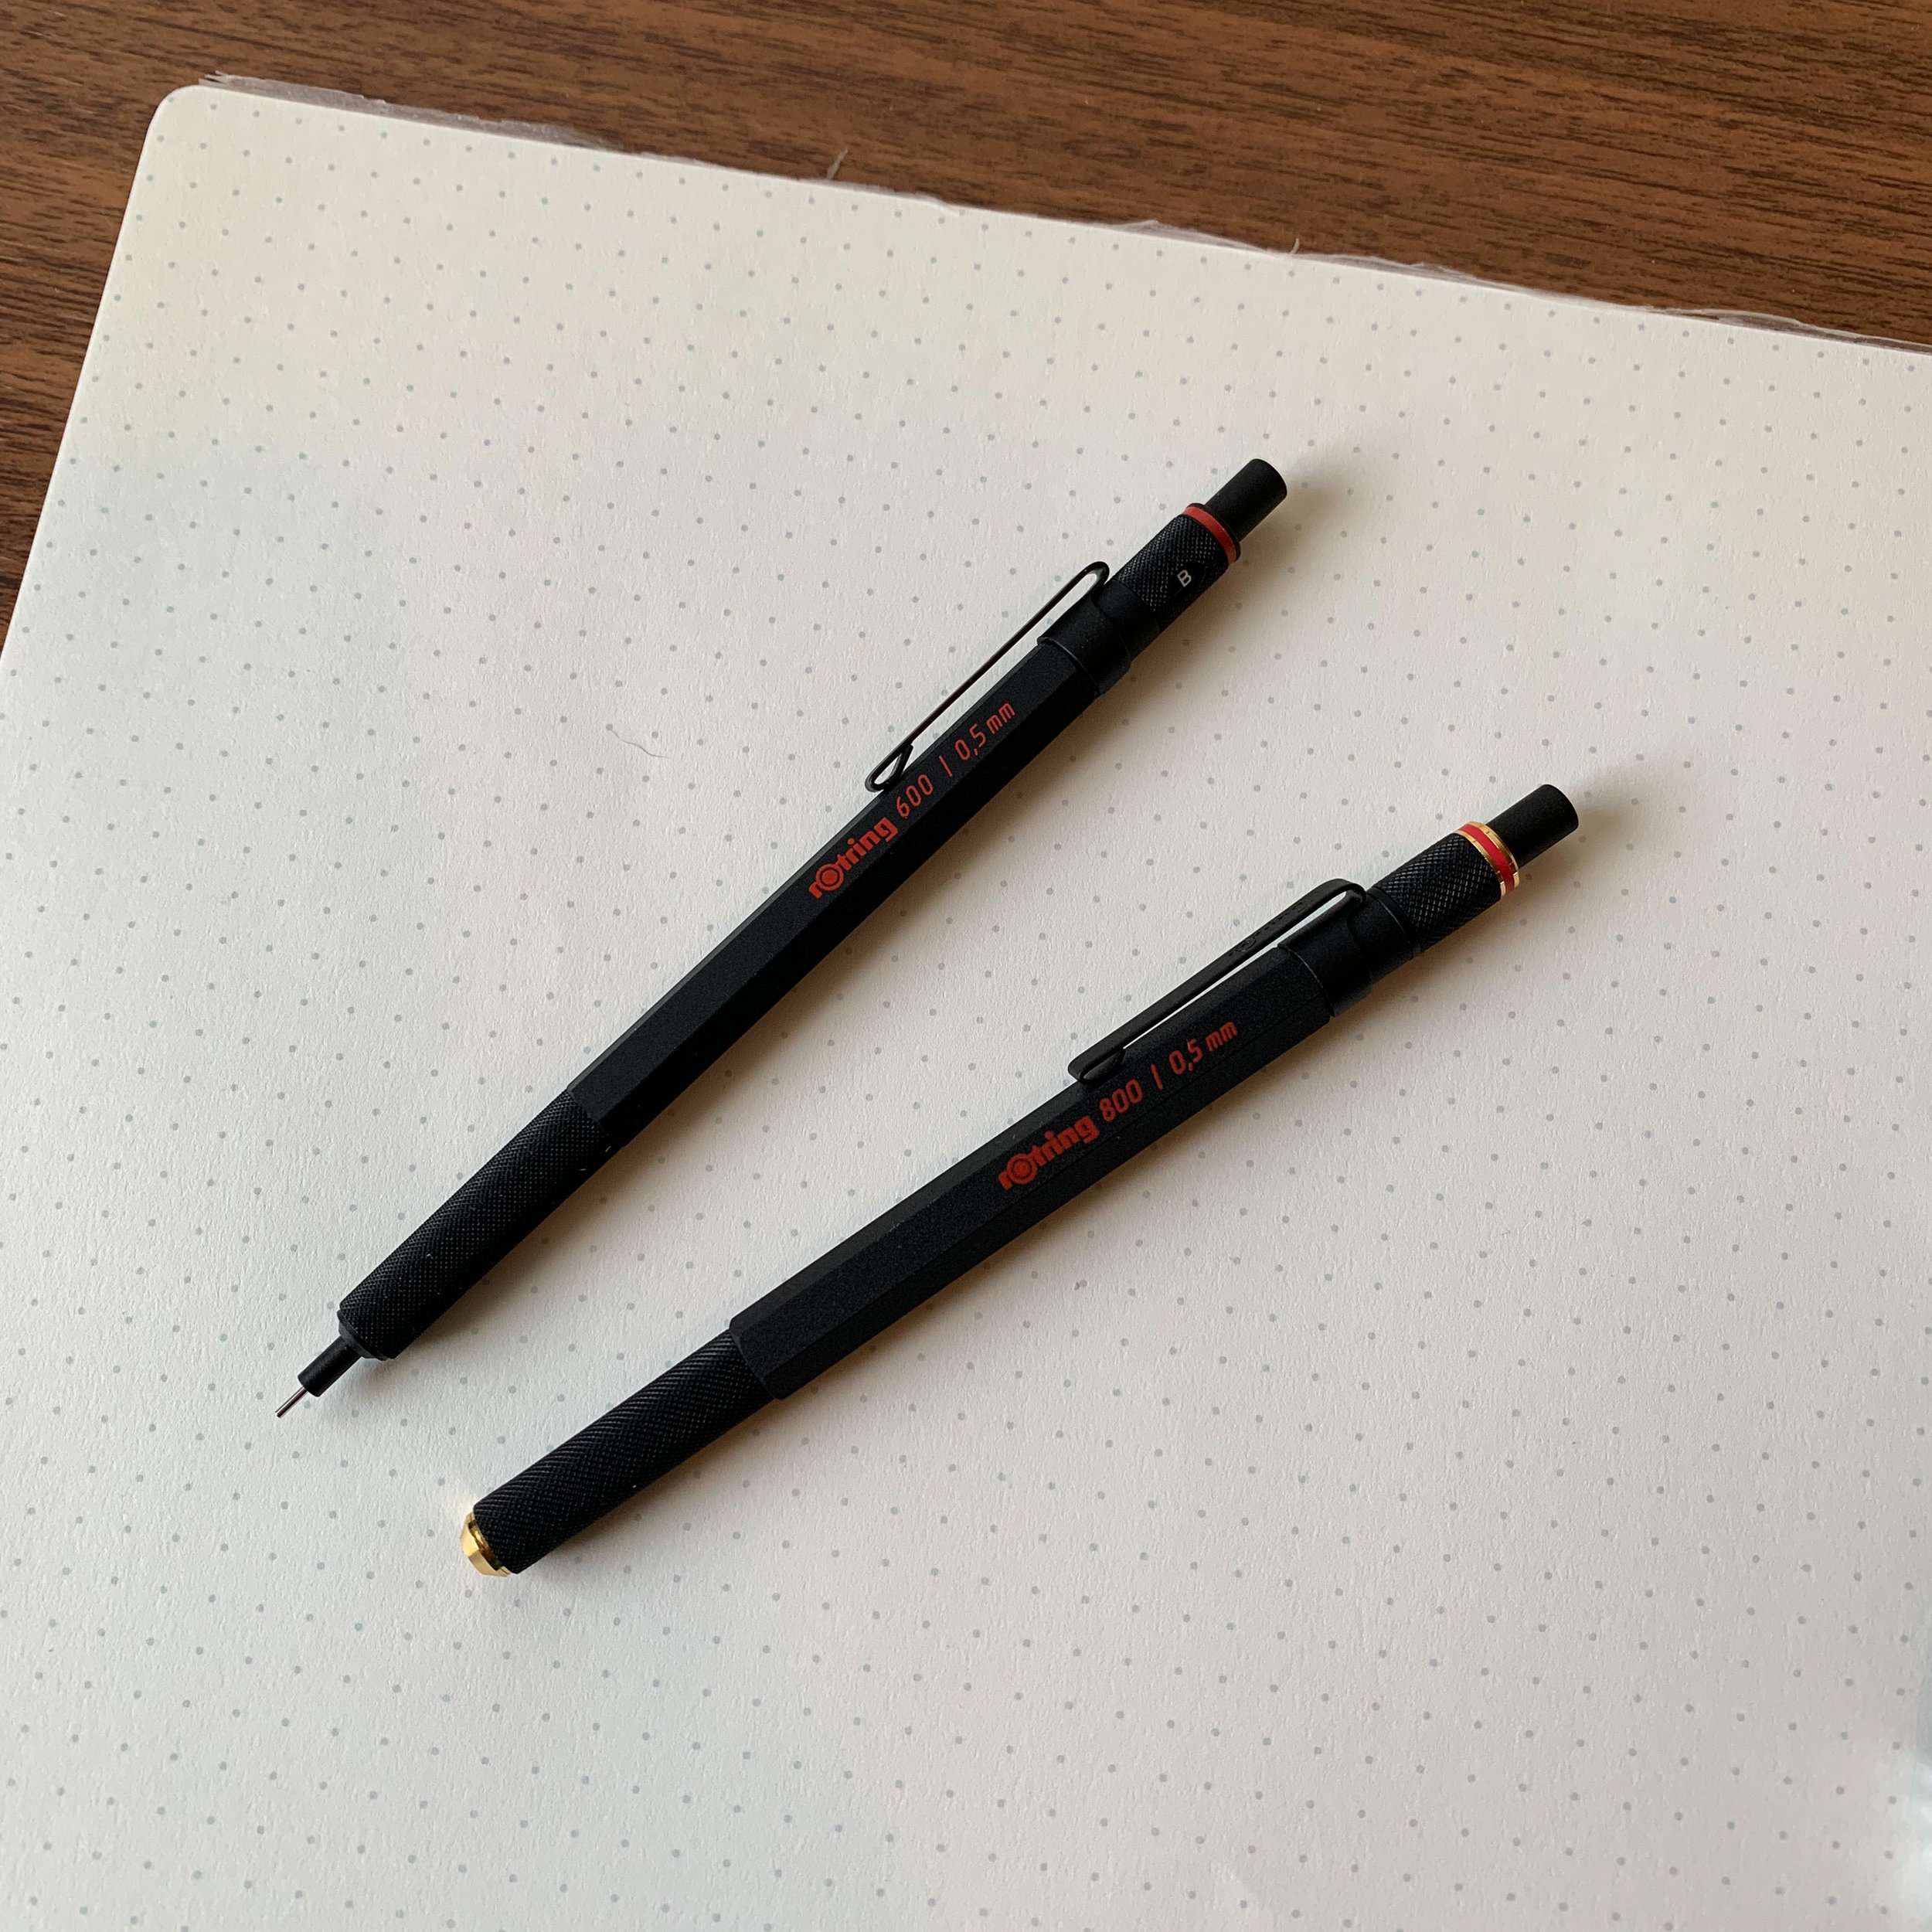 11 Best Mechanical Pencils For Writing (Buying Guide)